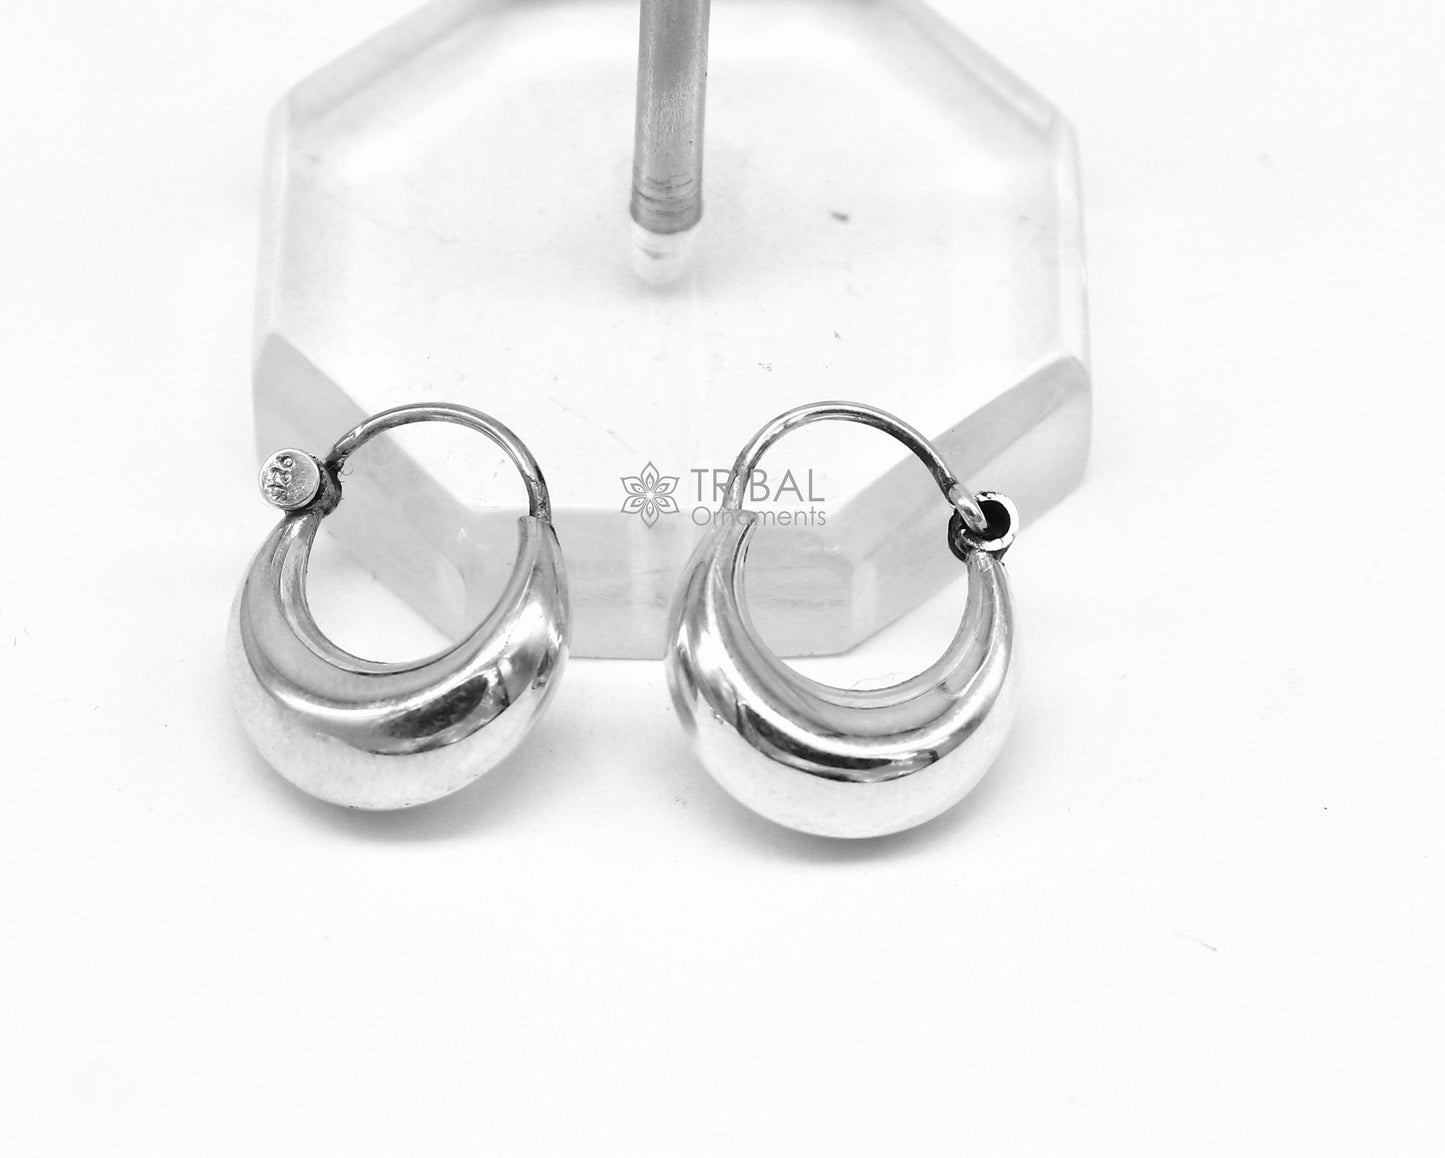 Indian Traditional cultural trendy style 925 sterling silver plain shiny hoops earring, amazing unisex light weight hoops earrings s1149 - TRIBAL ORNAMENTS